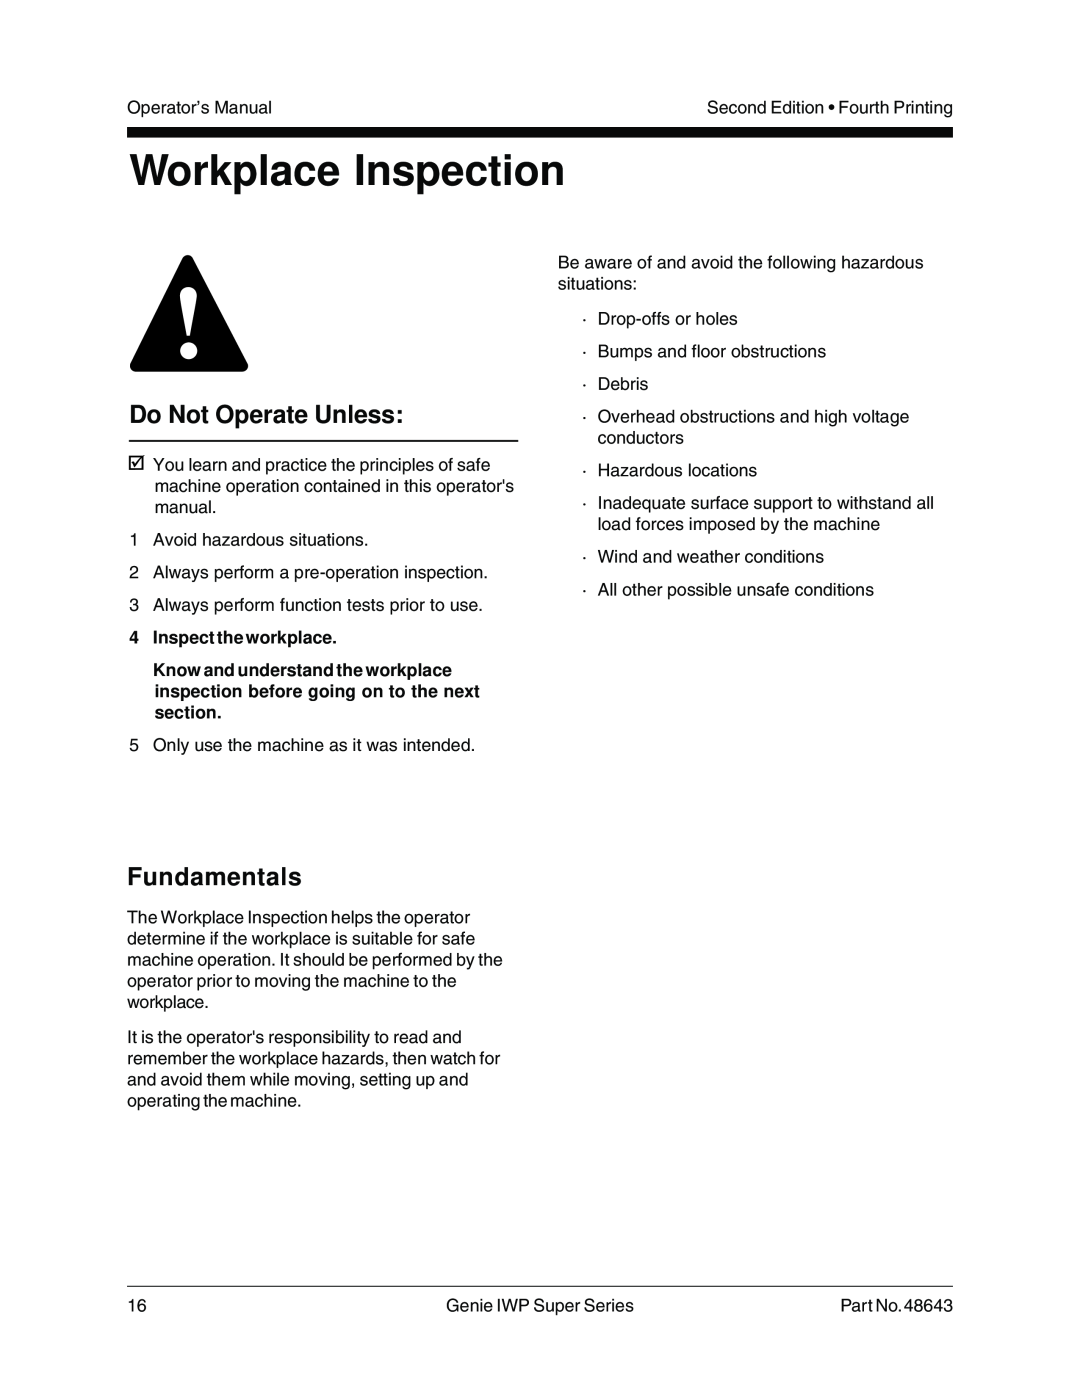 Genie 48643 manual Workplace Inspection, 4Inspect the workplace, Do Not Operate Unless, Fundamentals 